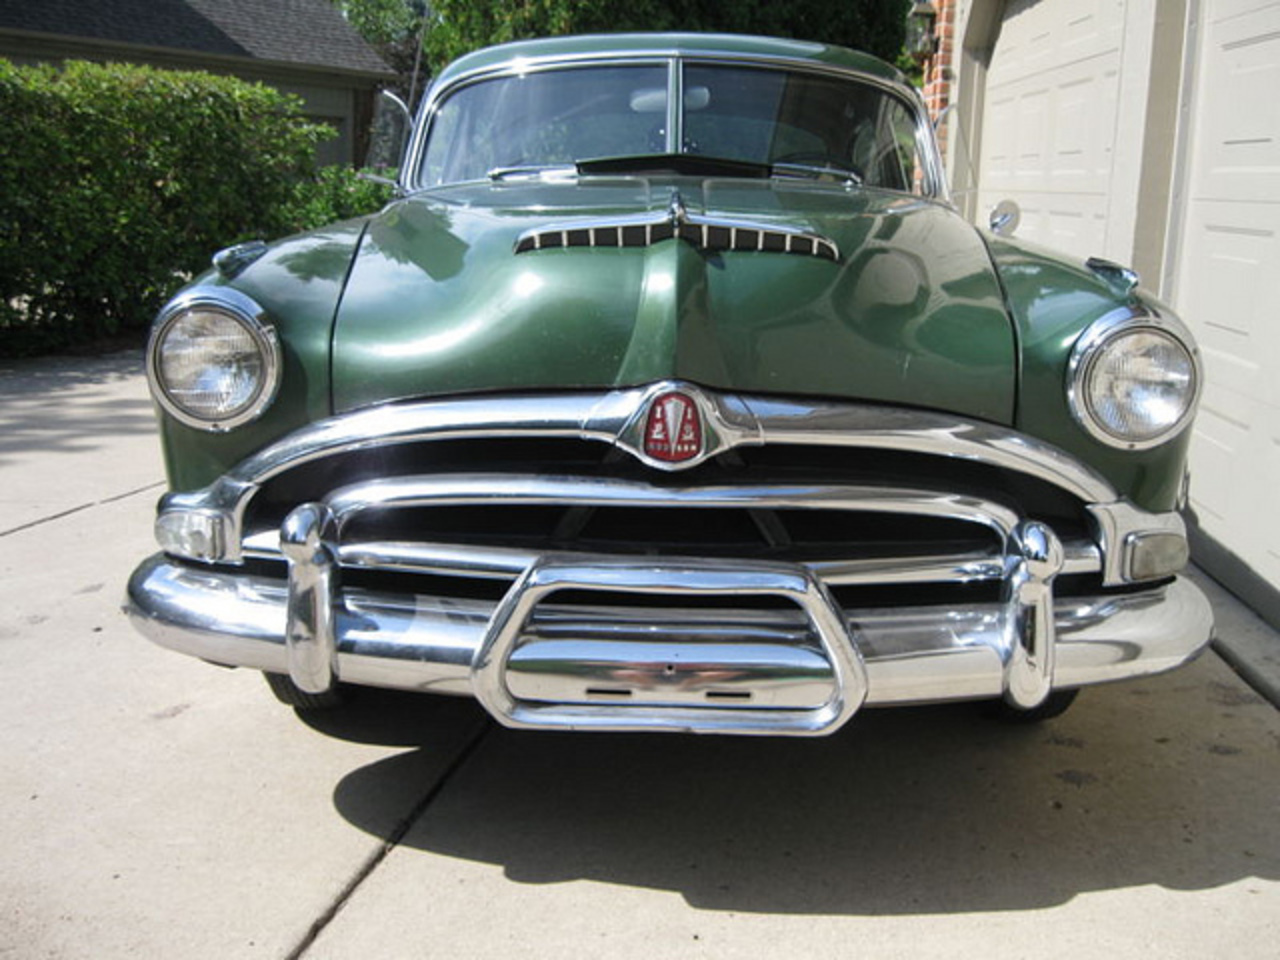 1953 Hudson Hornet Club Coupe. | Flickr - Photo Sharing!